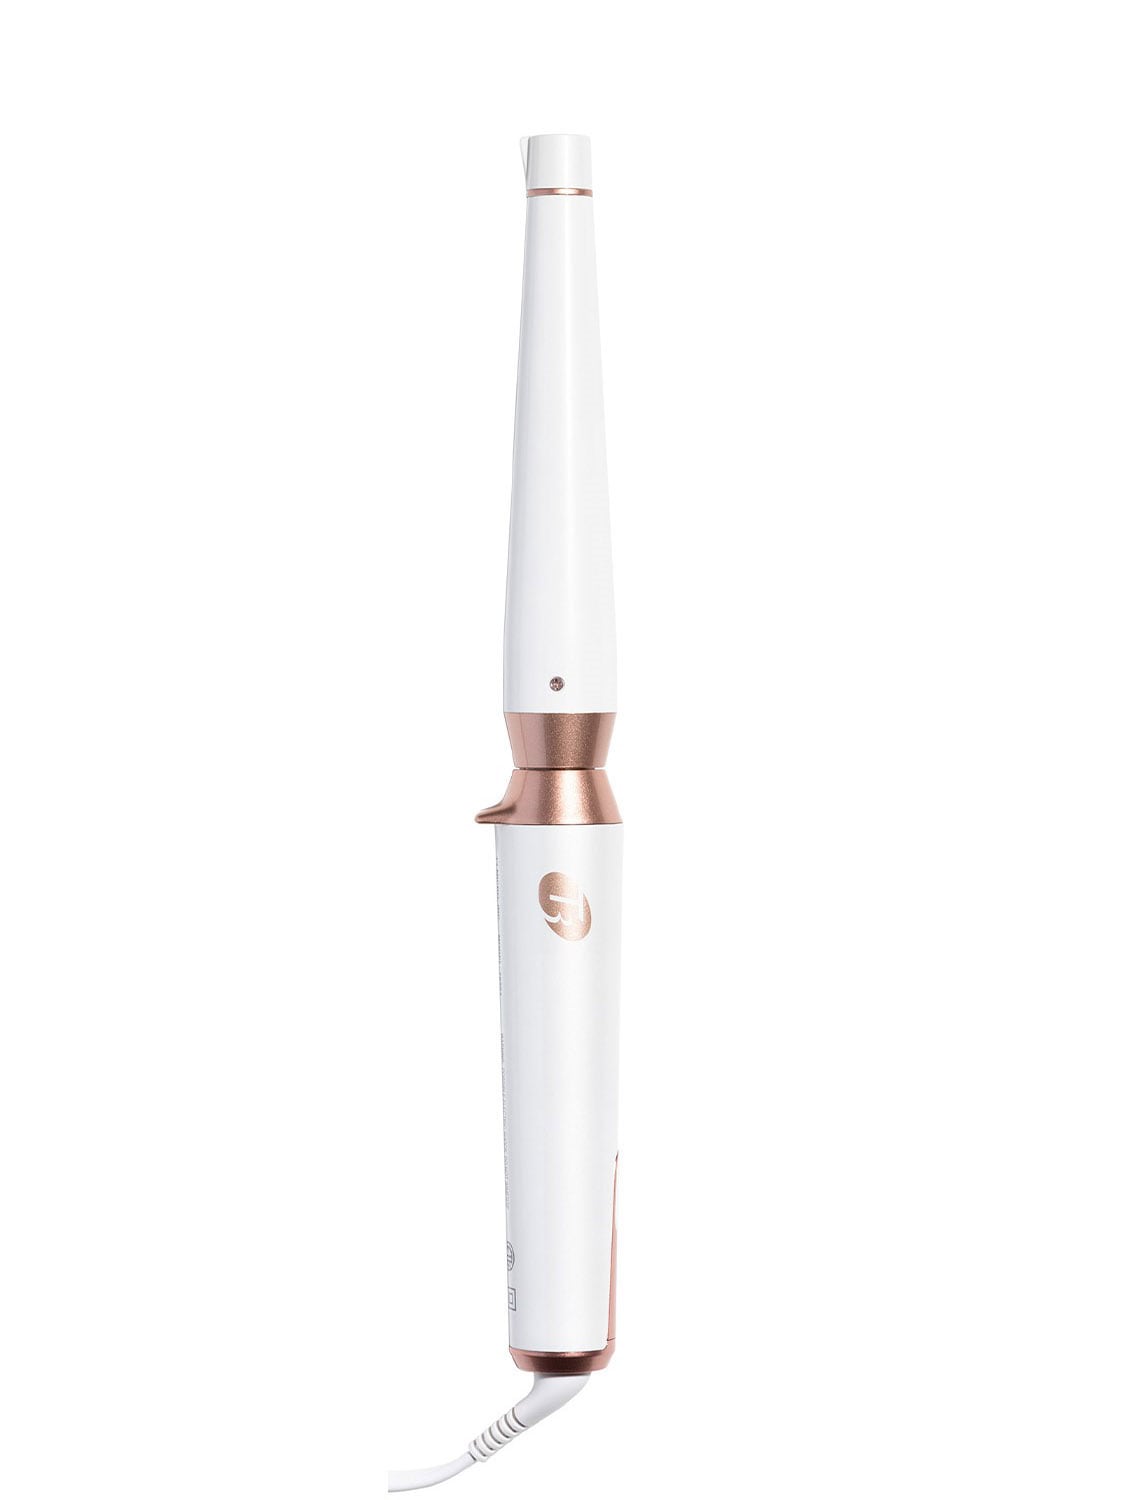 Image of Whirl Convertible Curling Iron